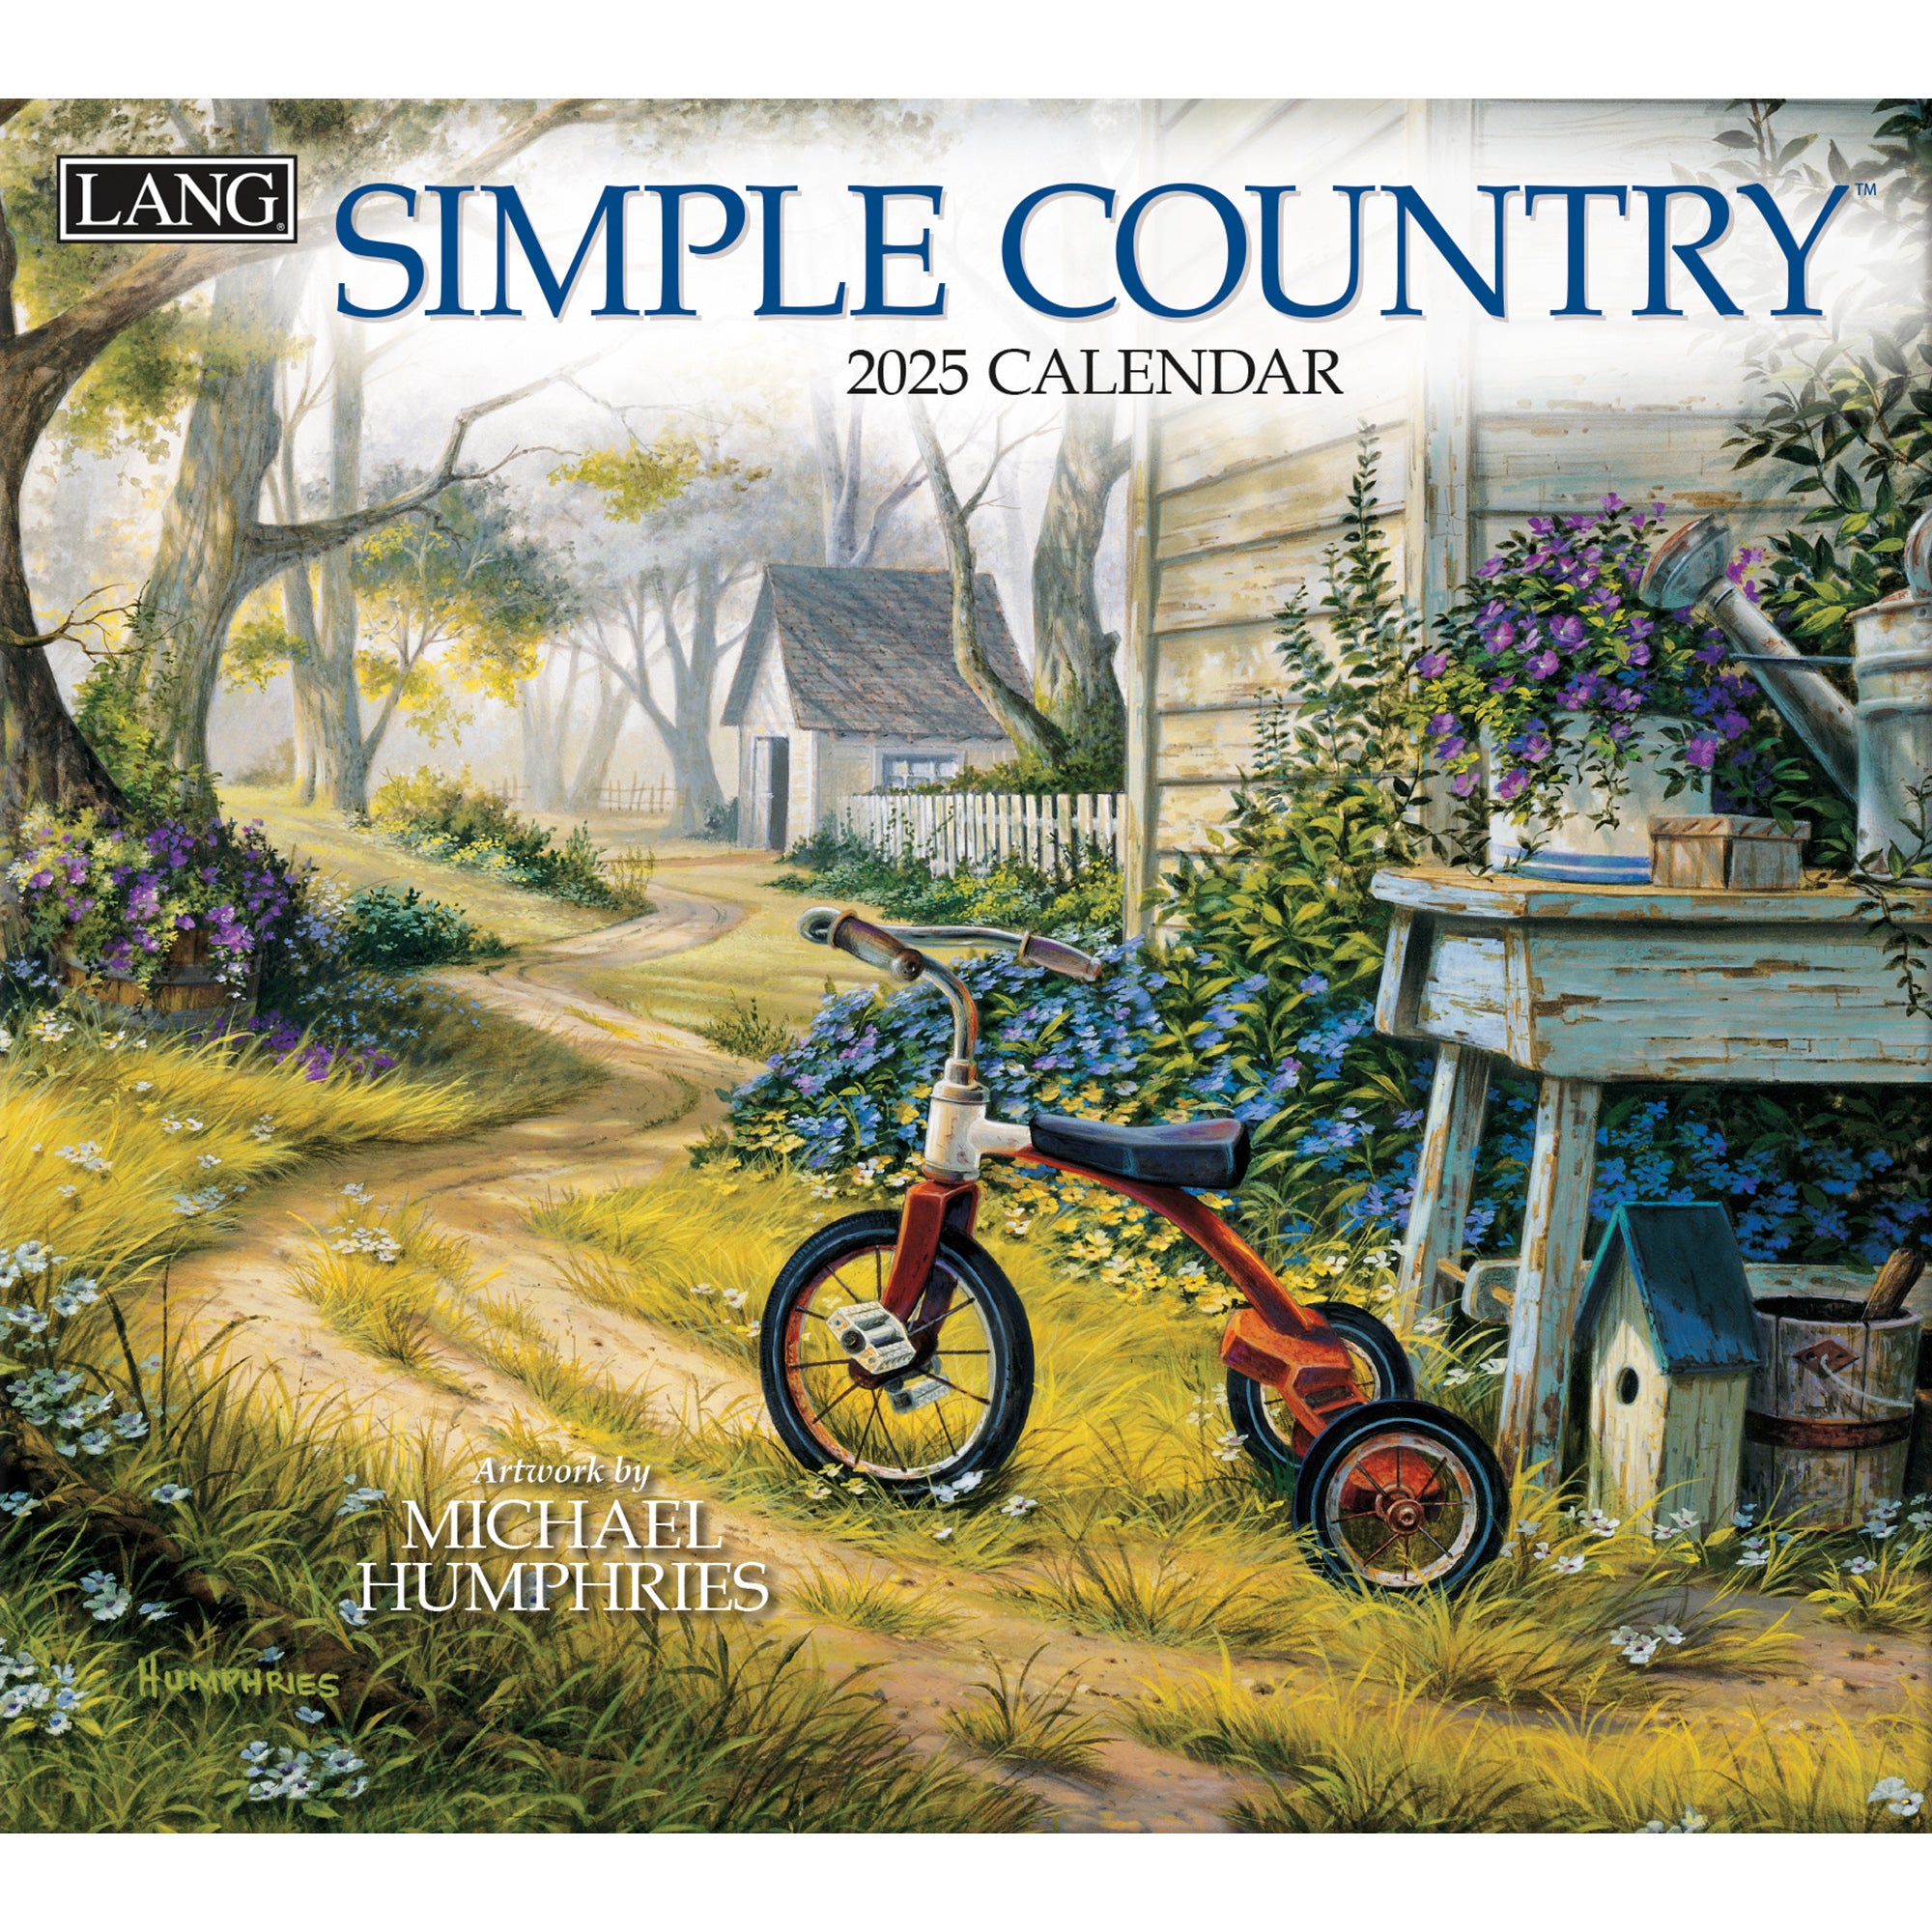 2025 Simple Country by Michael Humphries - LANG Deluxe Wall Calendar